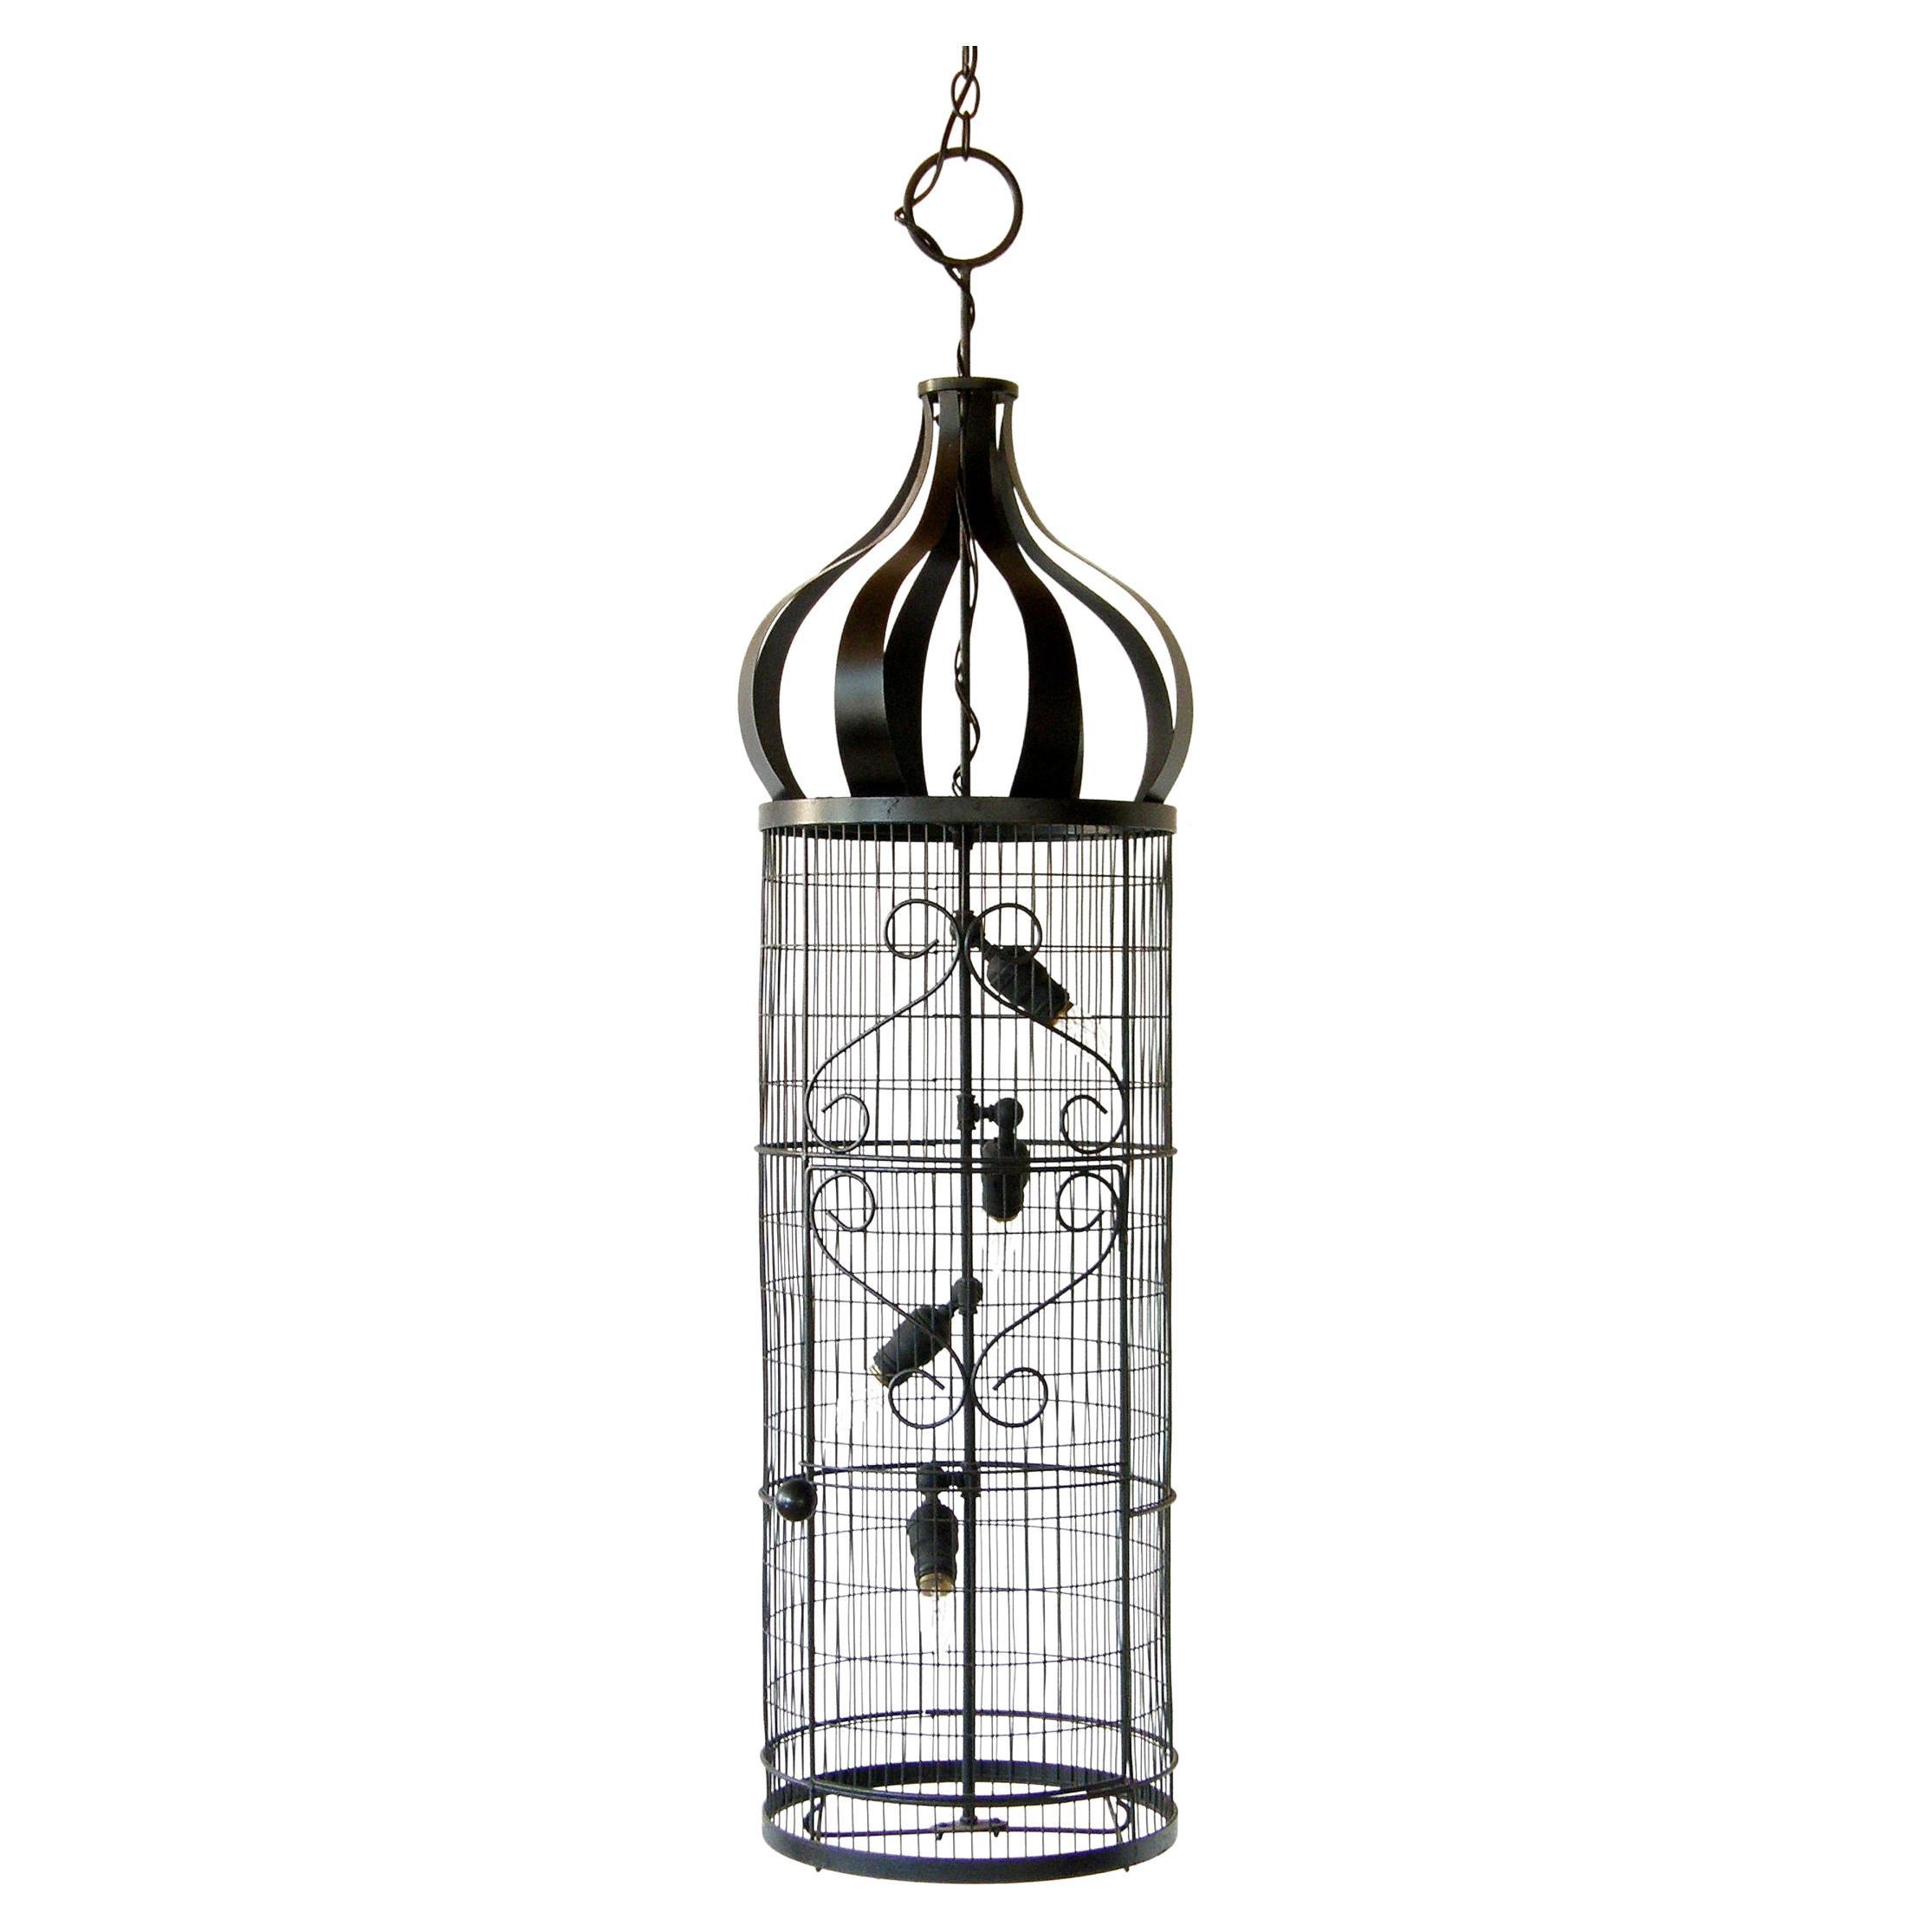 Frederic Weinberg Bird Cage Shaped Planter Hanging Fixture with Onion Dome Top